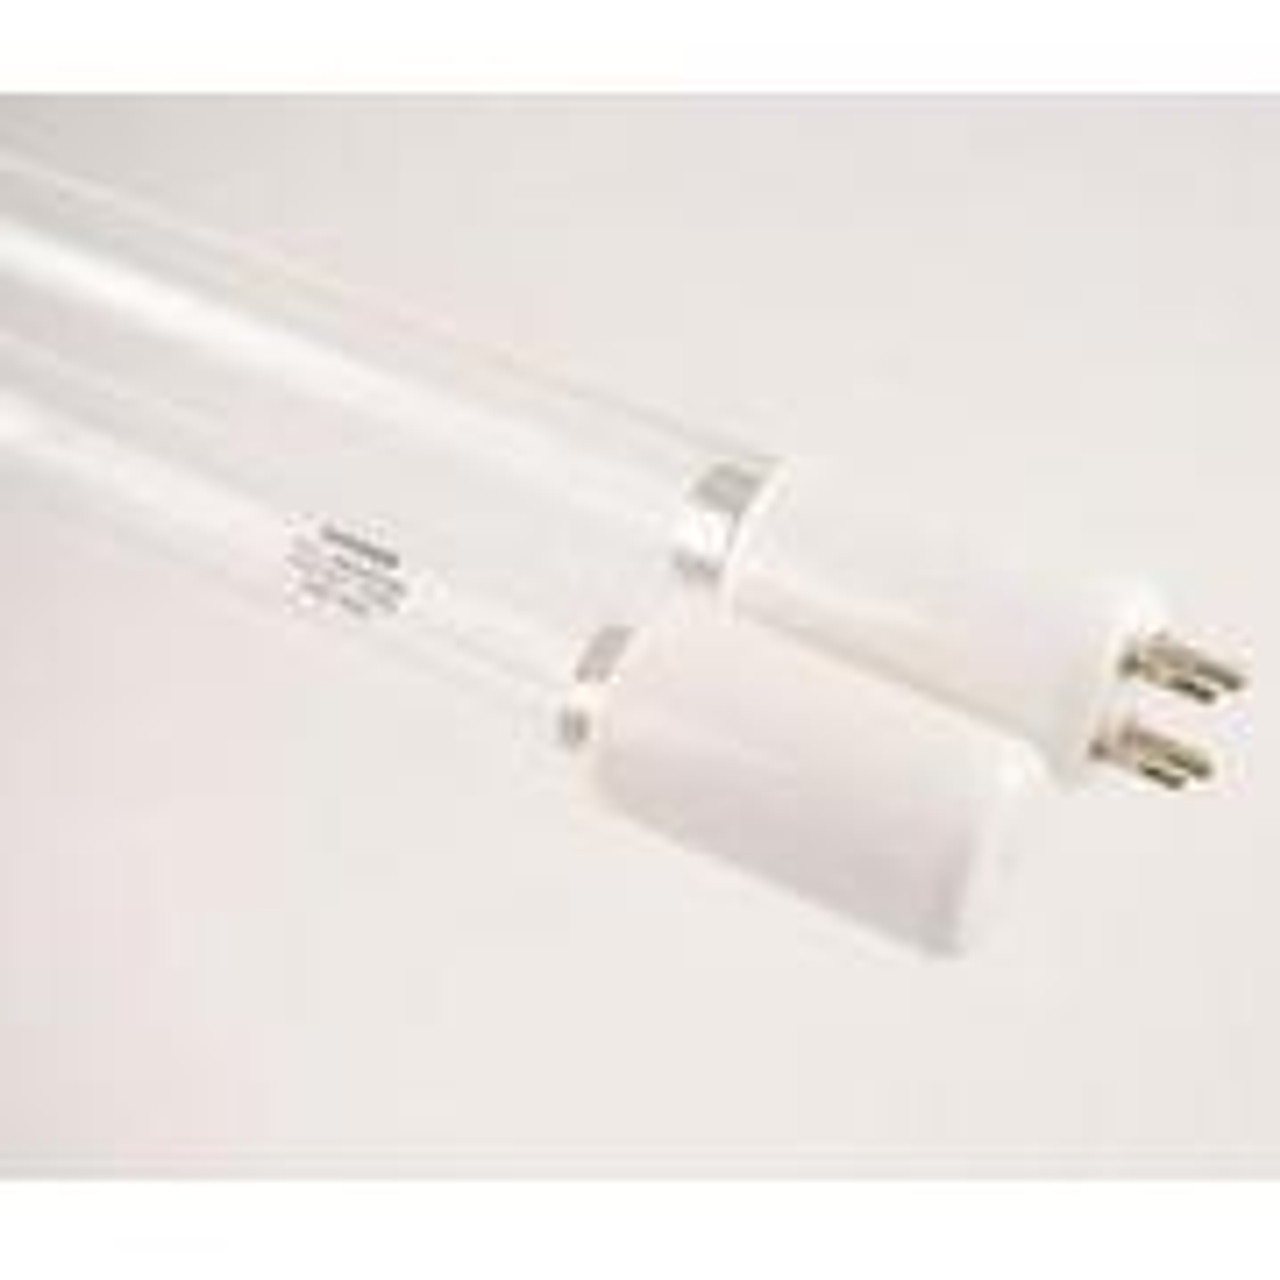 Emperor 120W High Output Replacement UV Bulb (7490120)